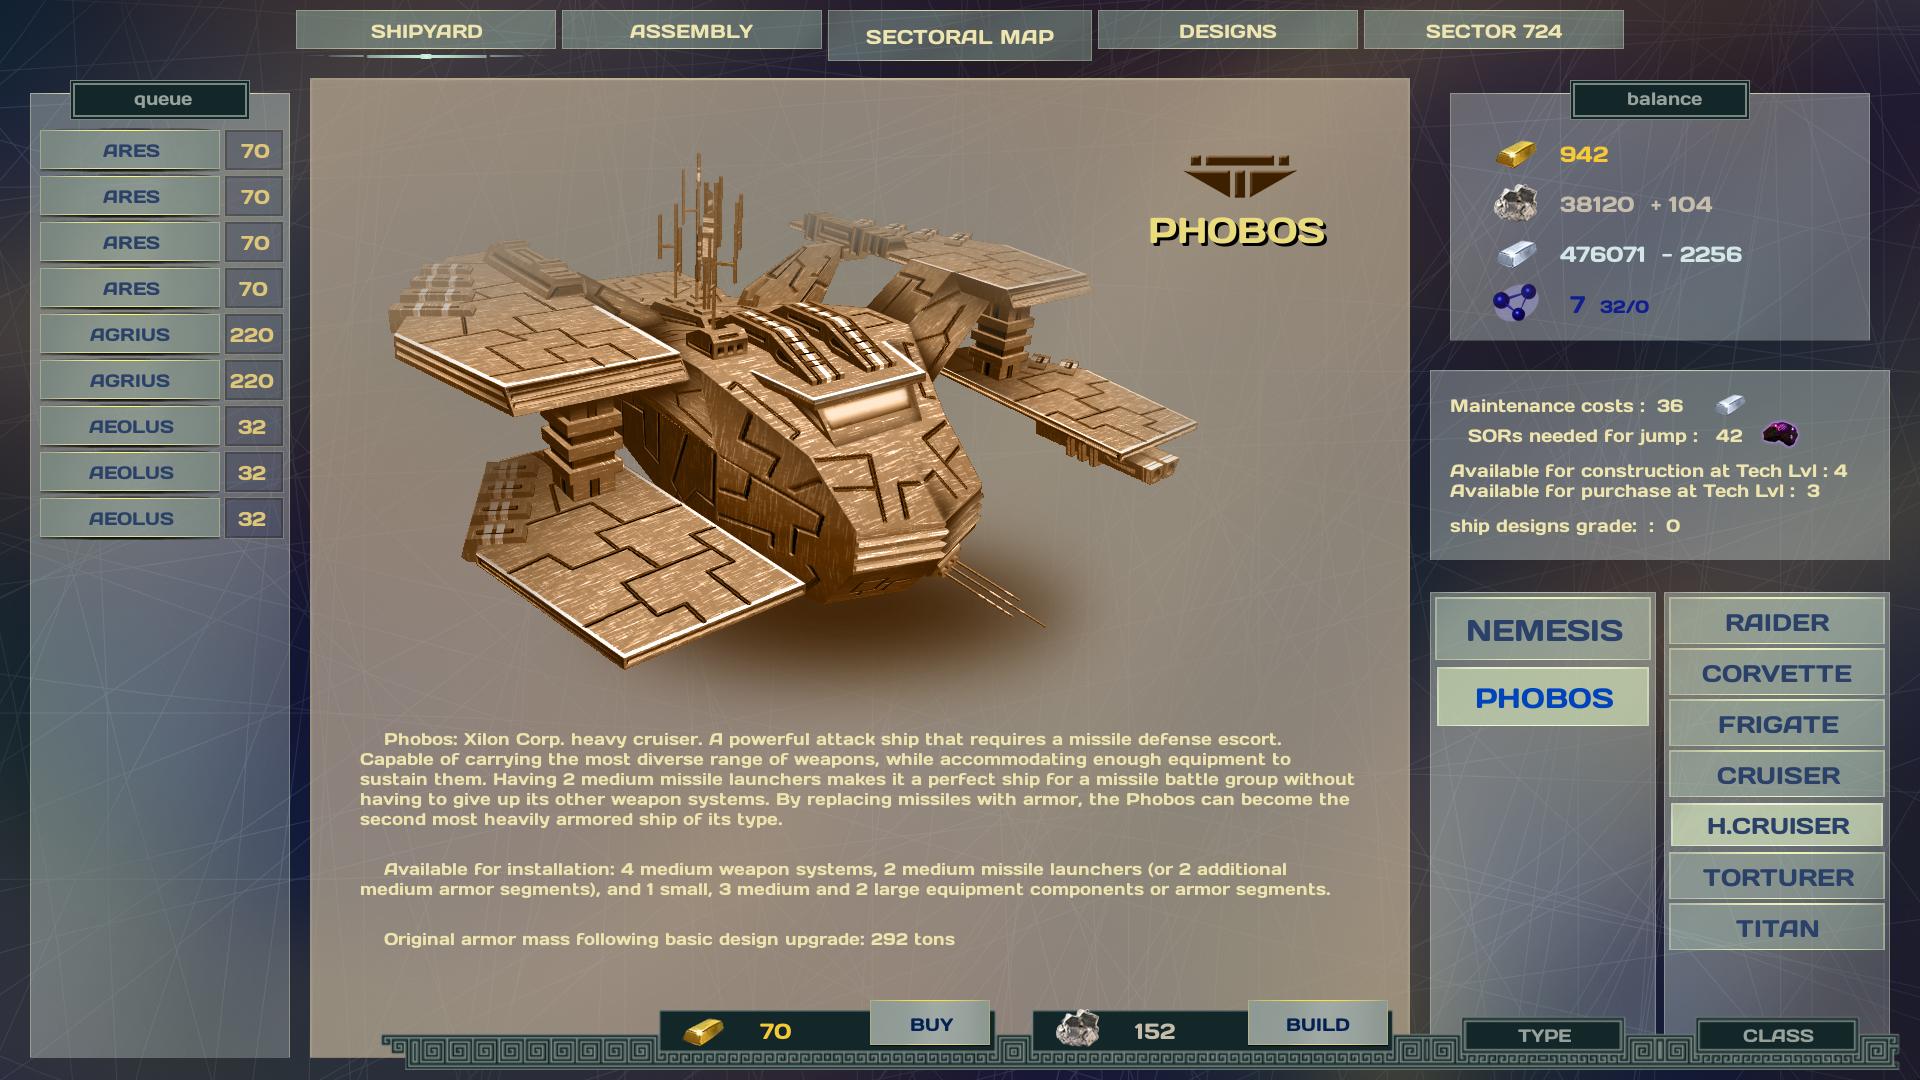 Screenshot №9 from game Sector 724